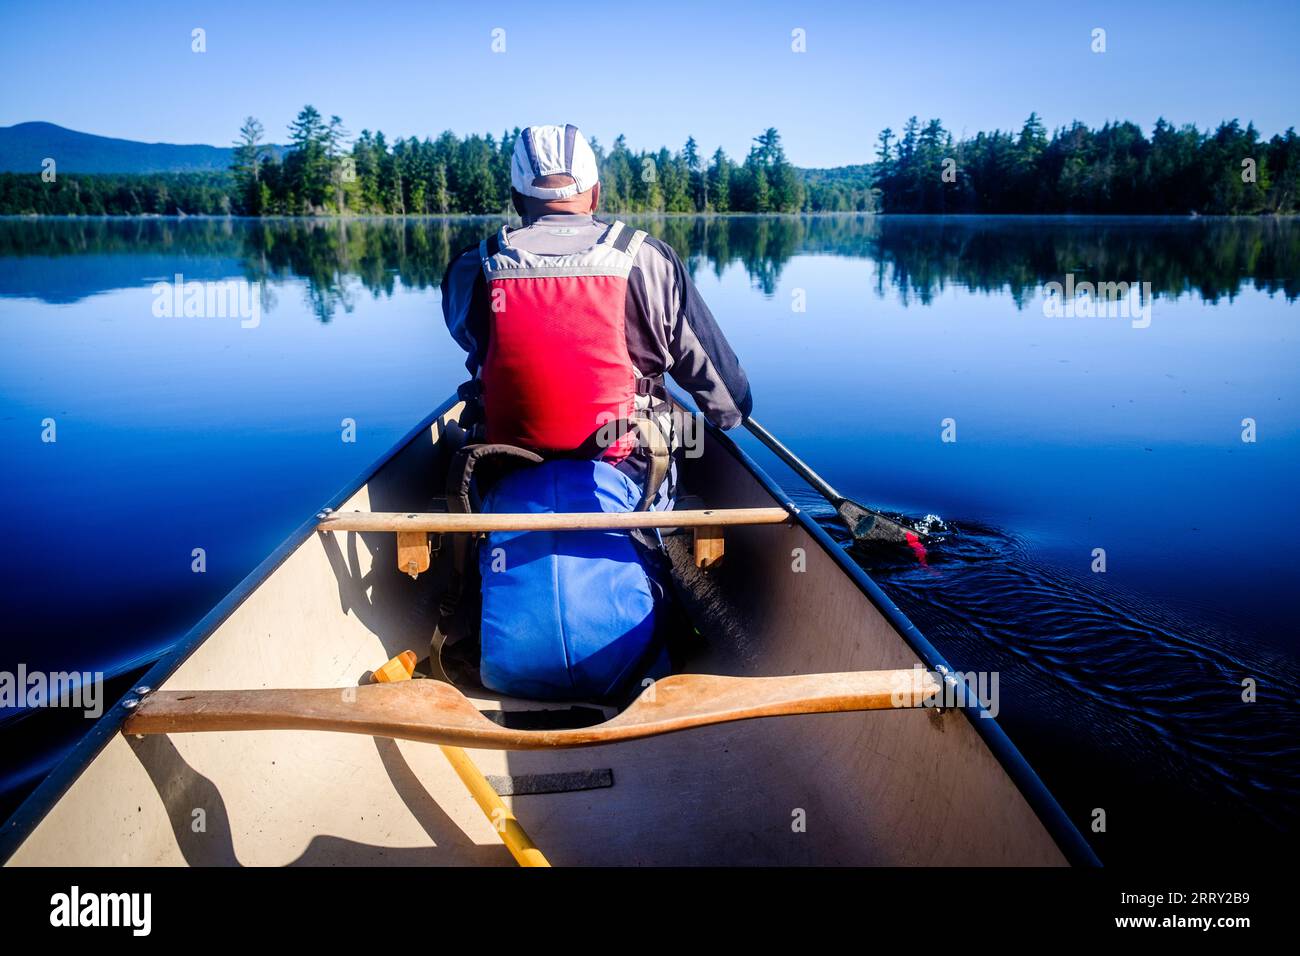 Canoeing in the Adirondack Mountains of New York State, USA, Essex Chain Lakes near Newcomb, NY, USA. Stock Photo